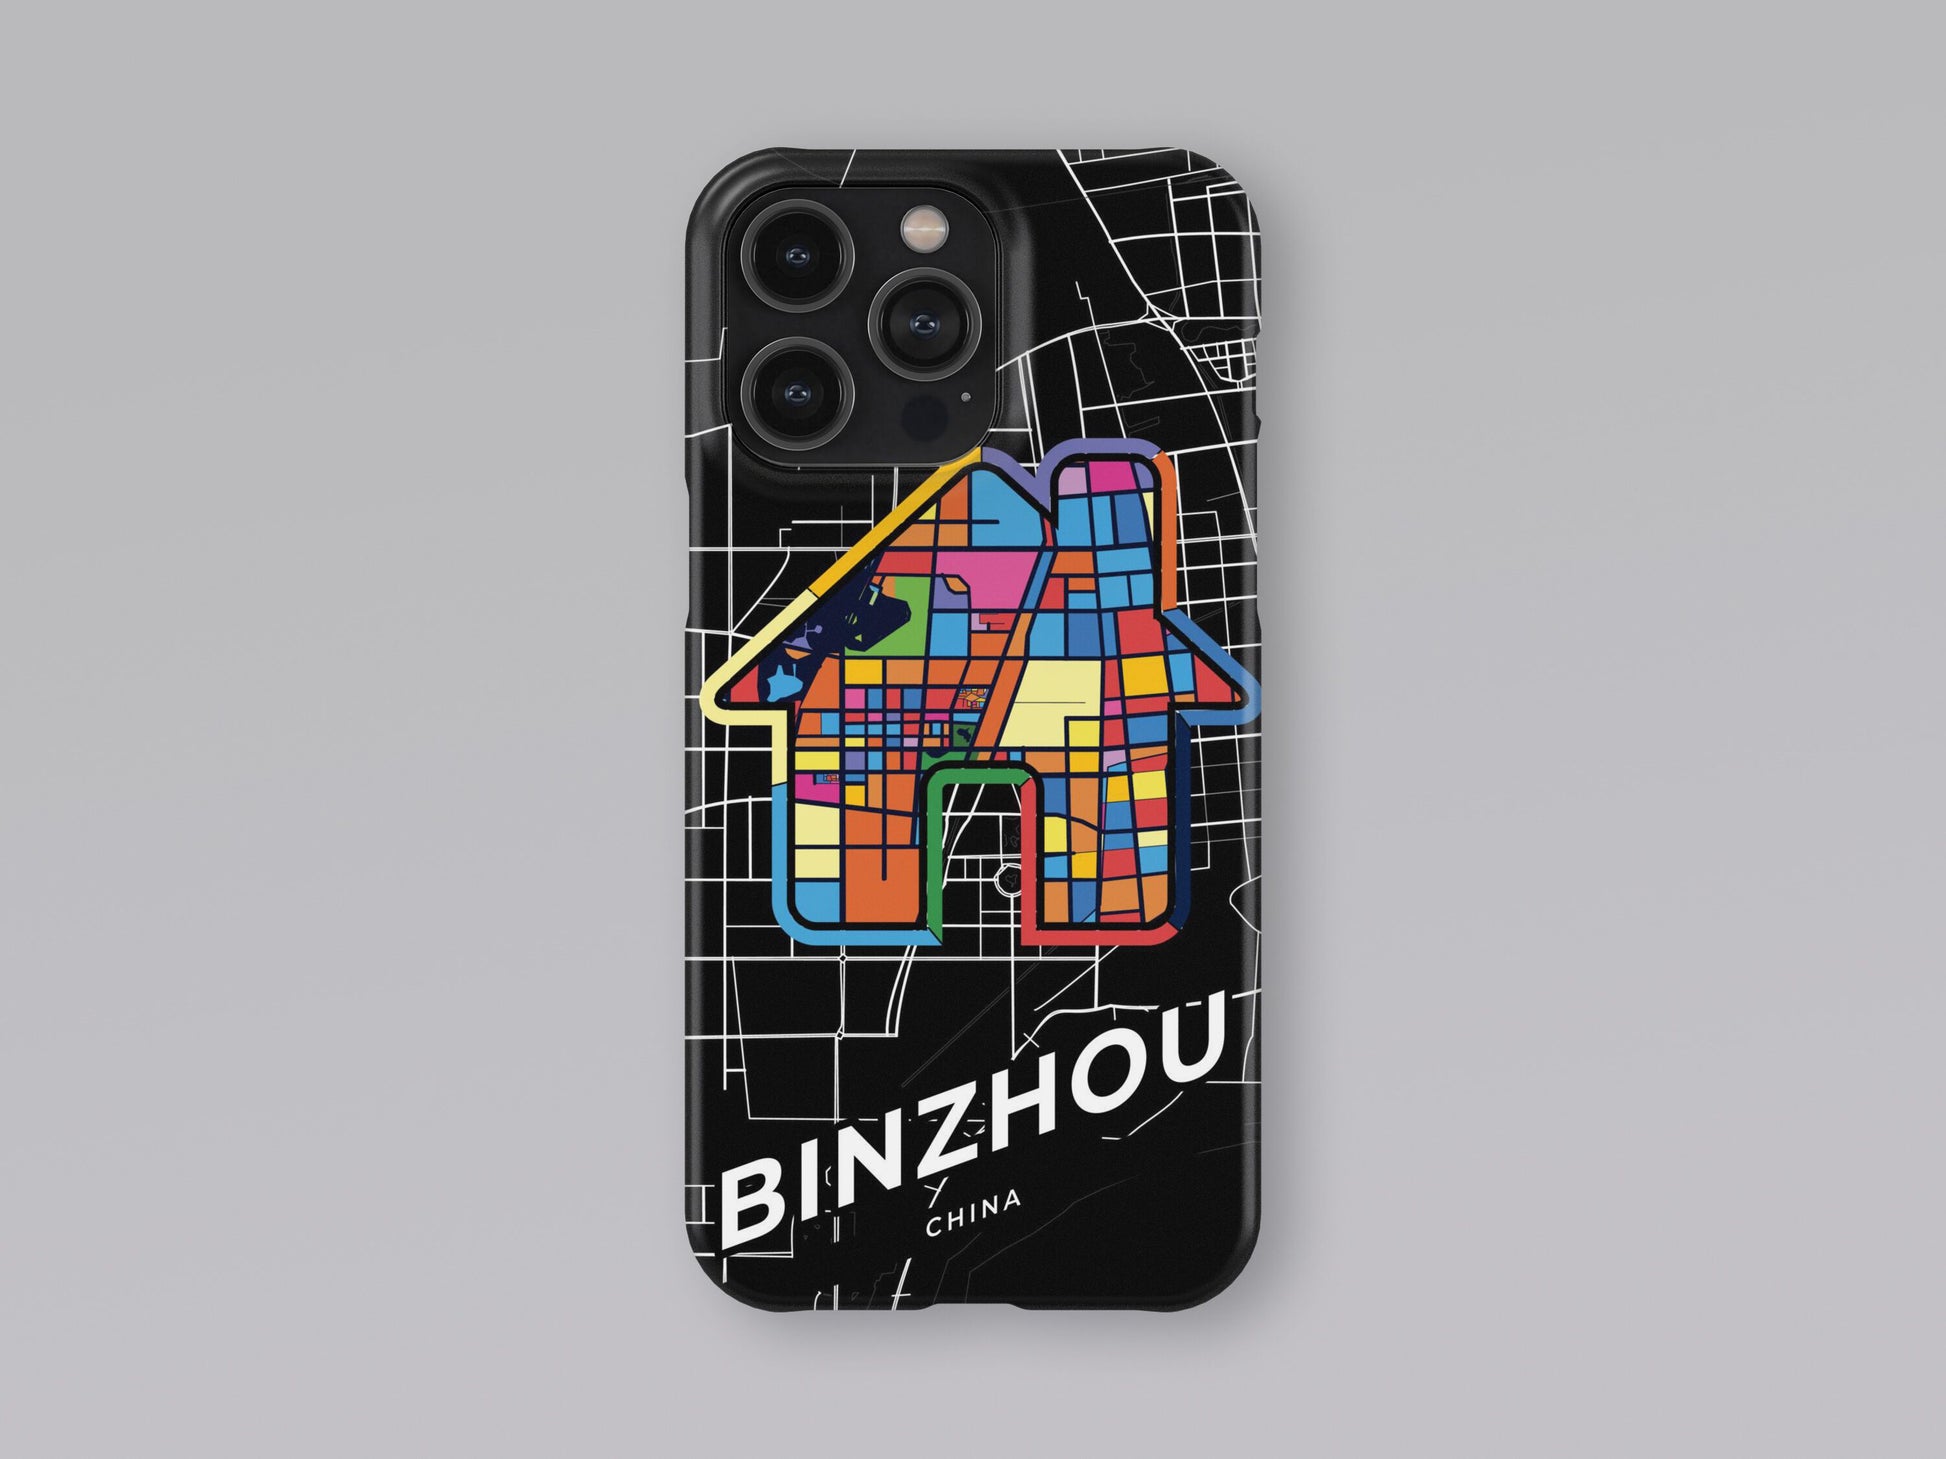 Binzhou China slim phone case with colorful icon. Birthday, wedding or housewarming gift. Couple match cases. 3